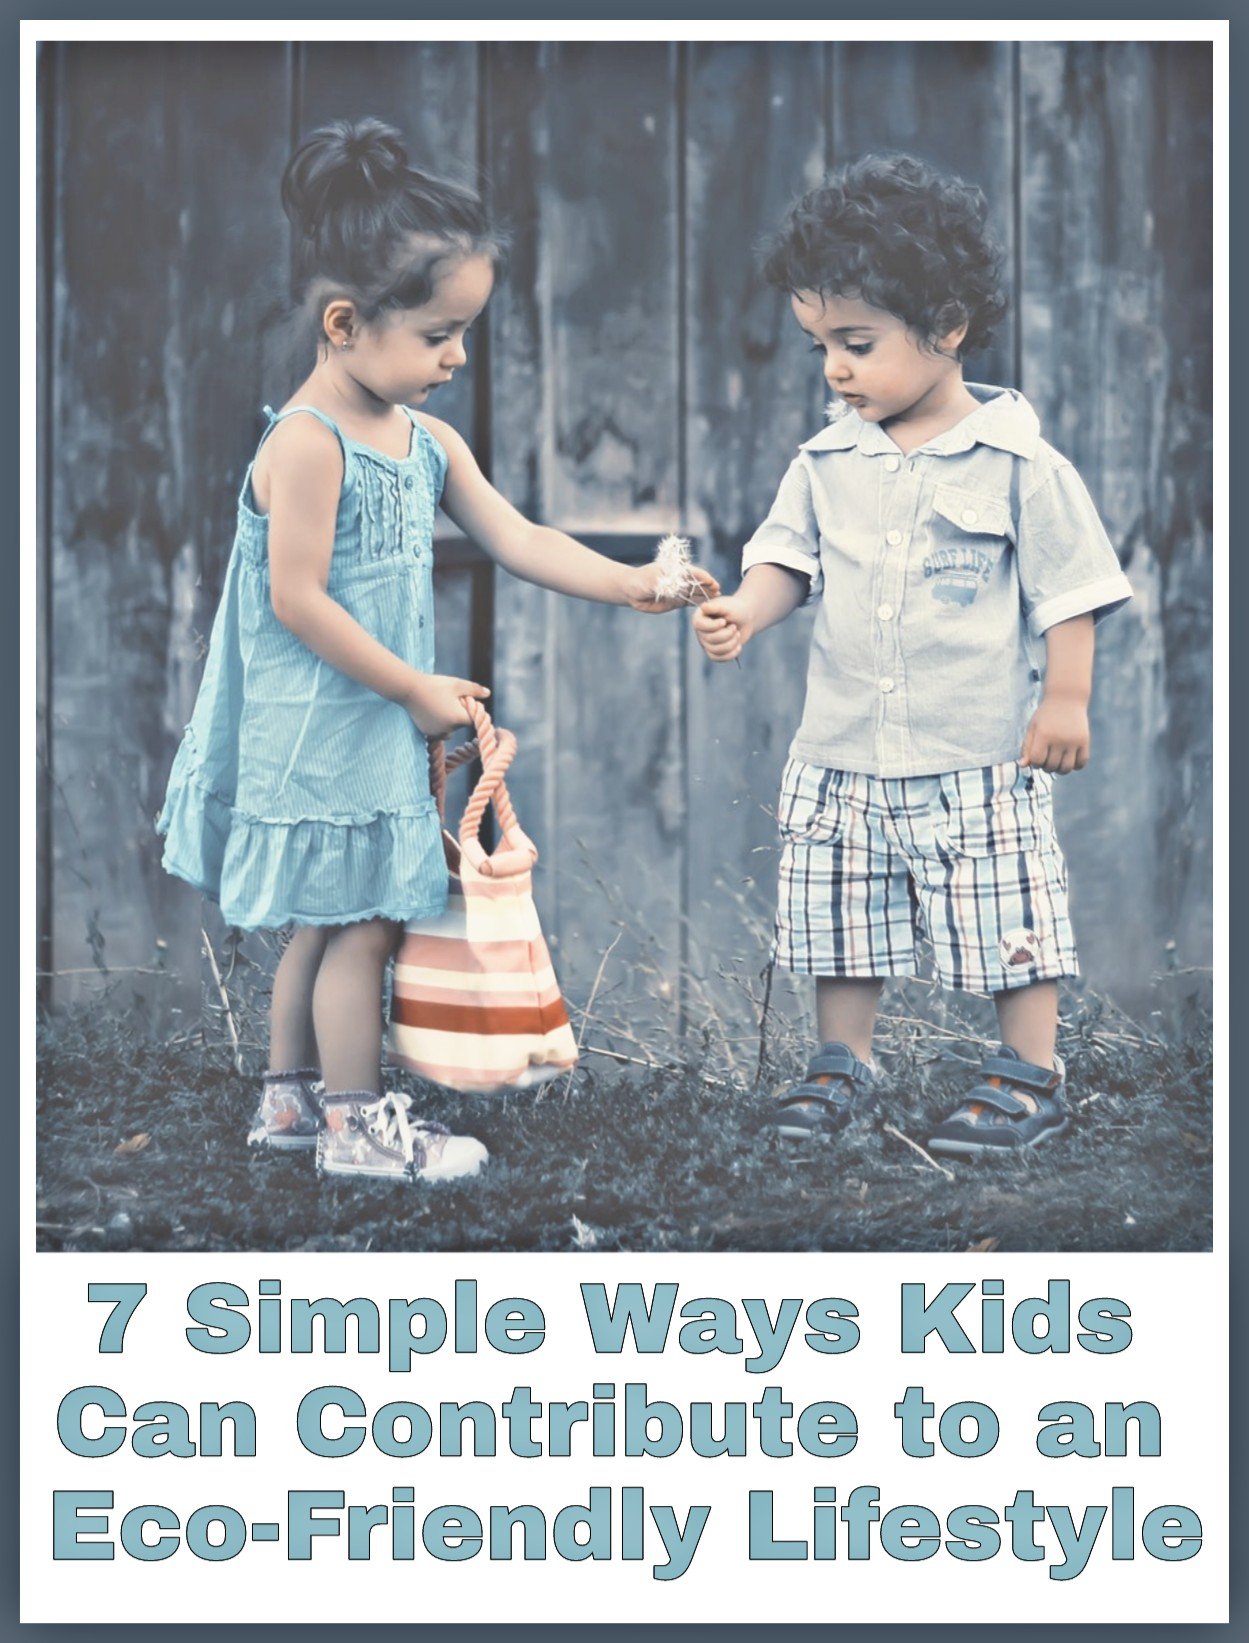 7 Simple Ways Kids Can Contribute to an Eco-Friendly Lifestyle title with image of two children